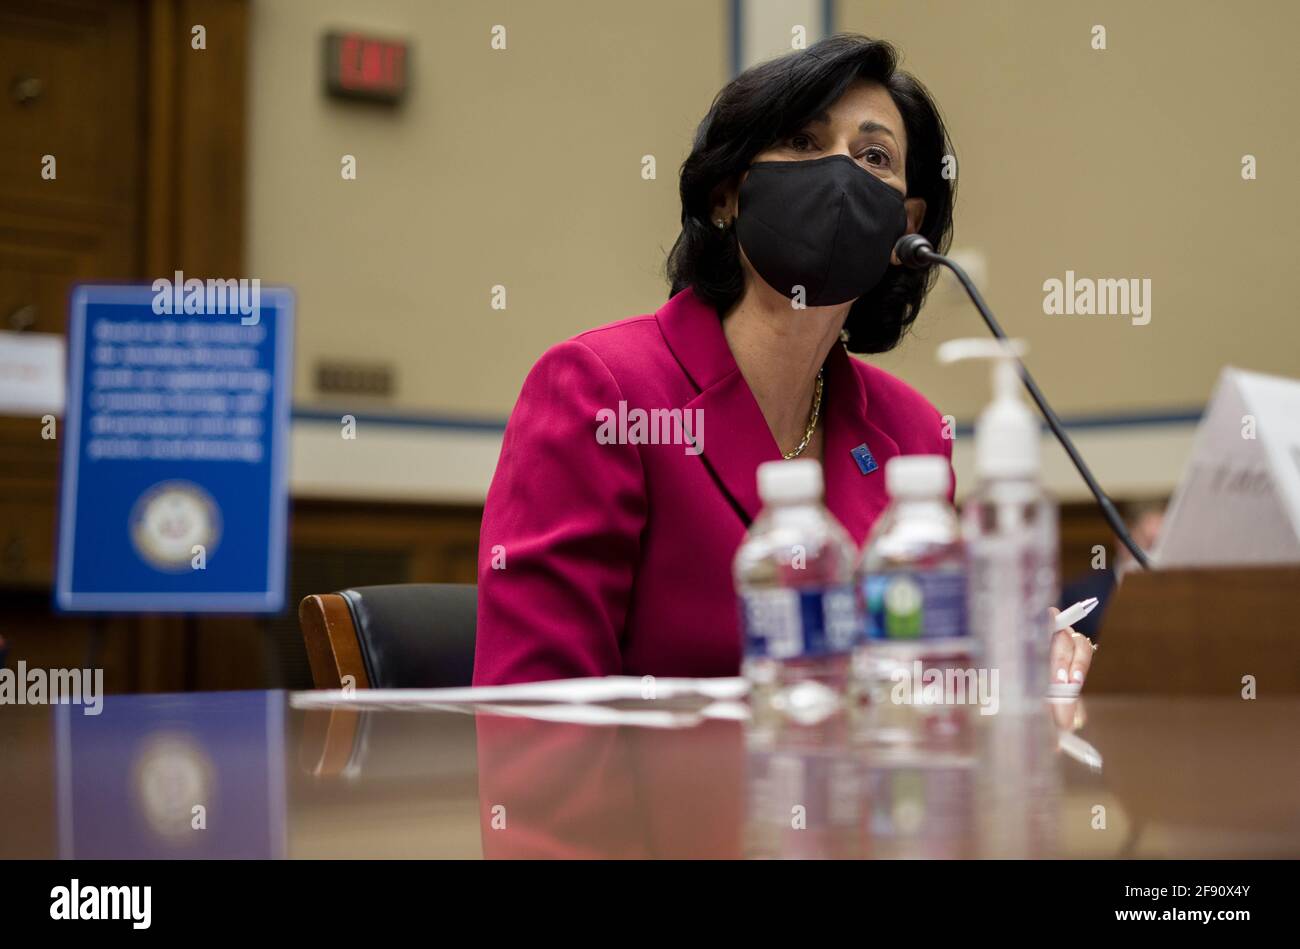 (210415) -- WASHINGTON, April 15, 2021 (Xinhua) -- Rochelle Walensky, director of the U.S. Centers for Disease Control and Prevention (CDC), testifies during a hearing of U.S. House Select Subcommittee on the Coronavirus Crisis in Washington, DC, the United States, on April 15, 2021. (Amr Alfiky/Pool via Xinhua) Stock Photo